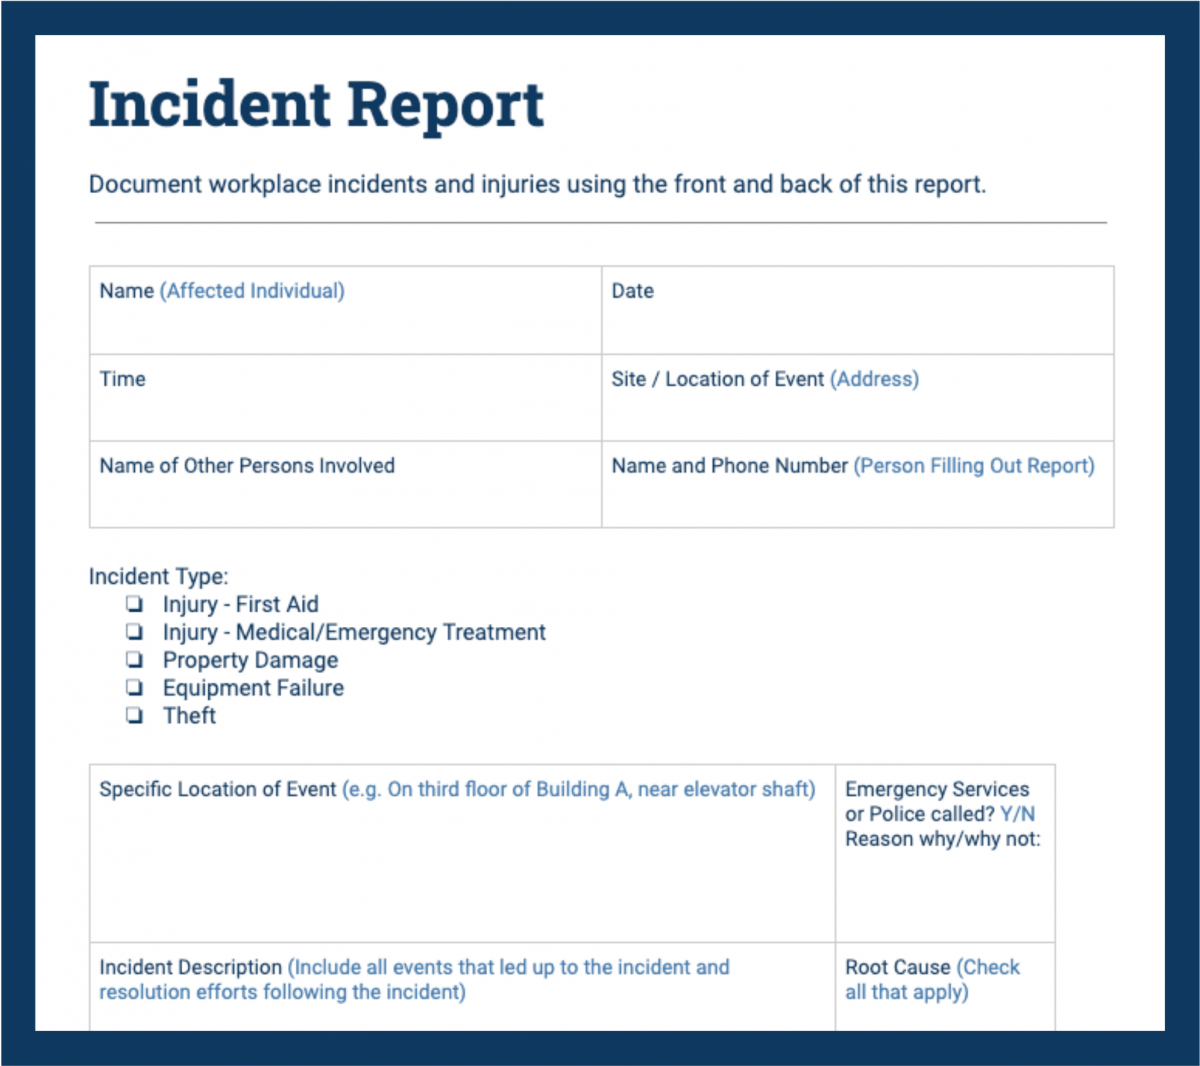 Incident Report Samples to Help You Describe Accidents - Safesite